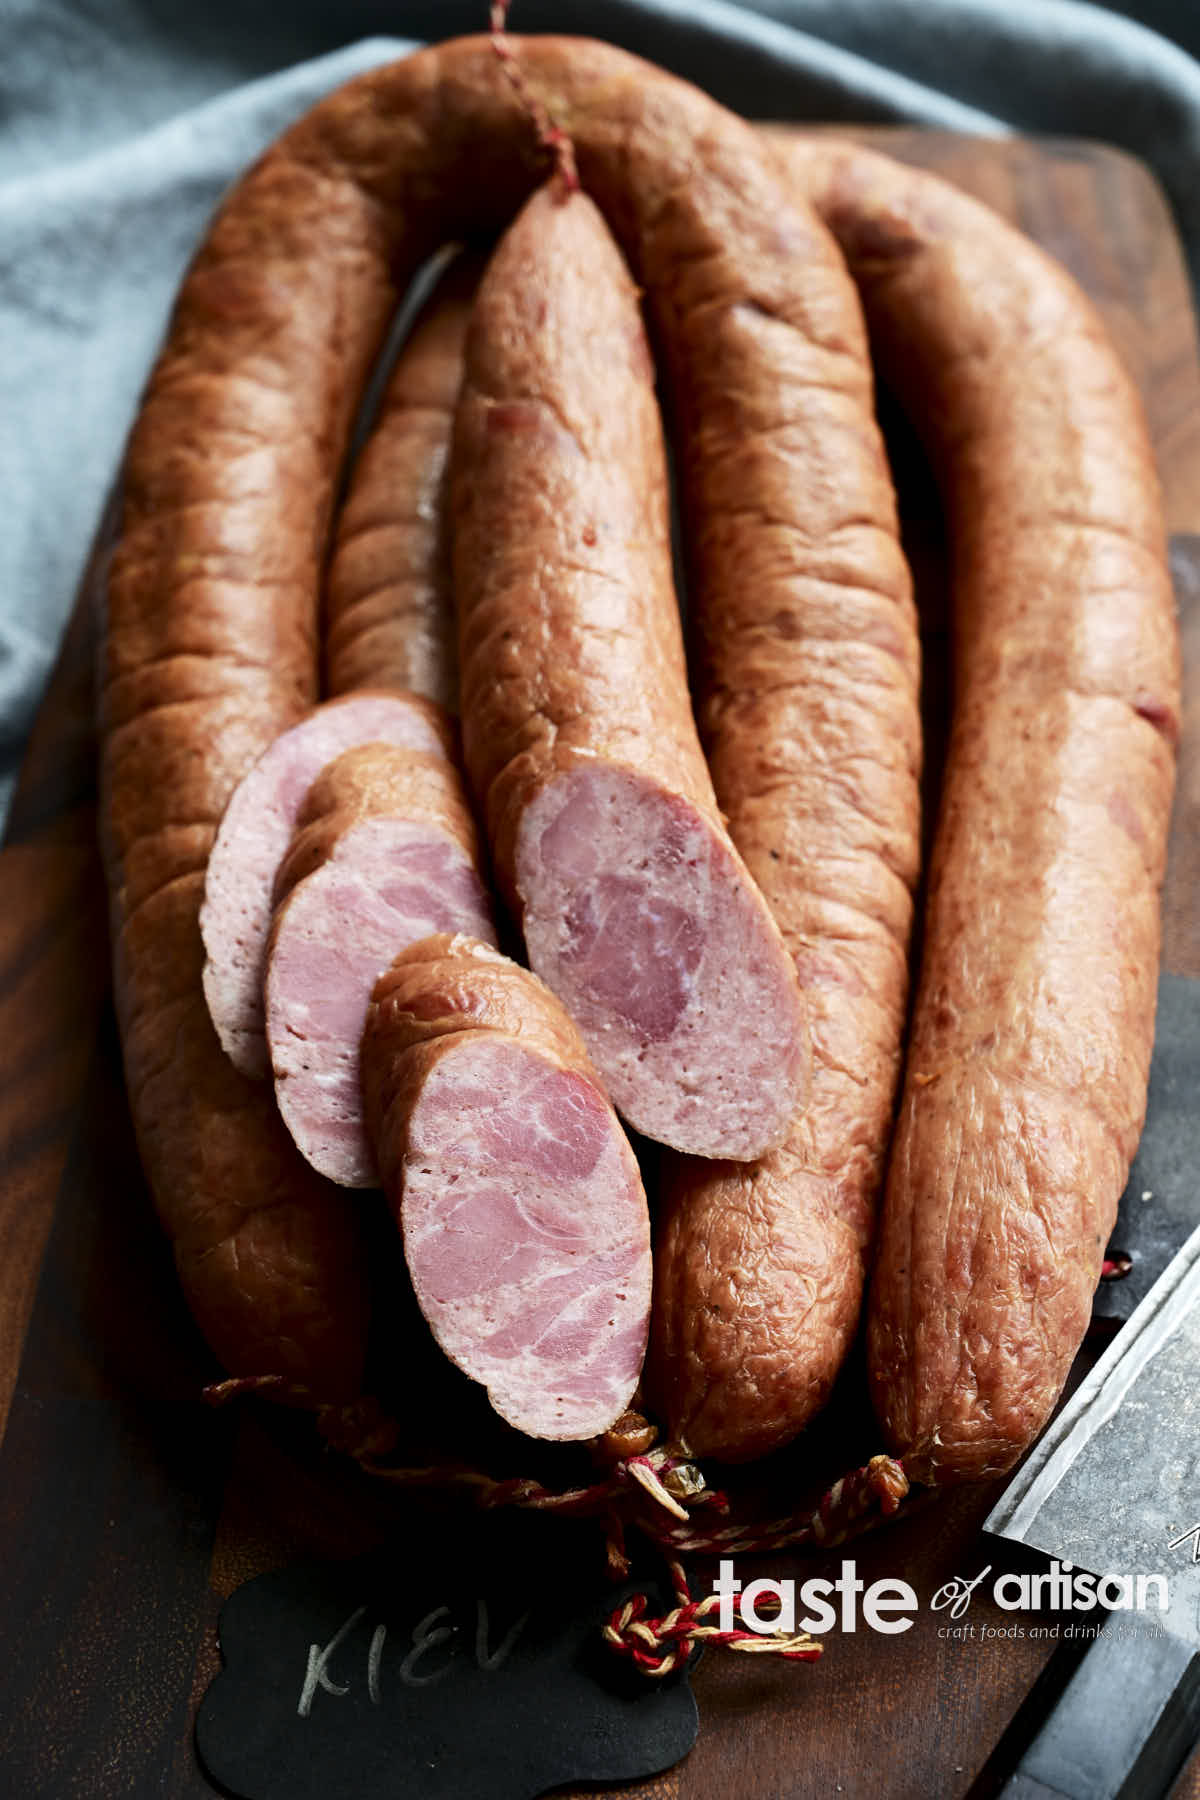 Kyiv smoked sausage is a lightly flavored but exceptionally tasty old-fashioned sausage with a delicate texture made using a new-to-me method whereby the sausage is first cooked and then smoked. You can think of it as a 'reverse-smoked' sausage. This one is a real crowd-pleaser.